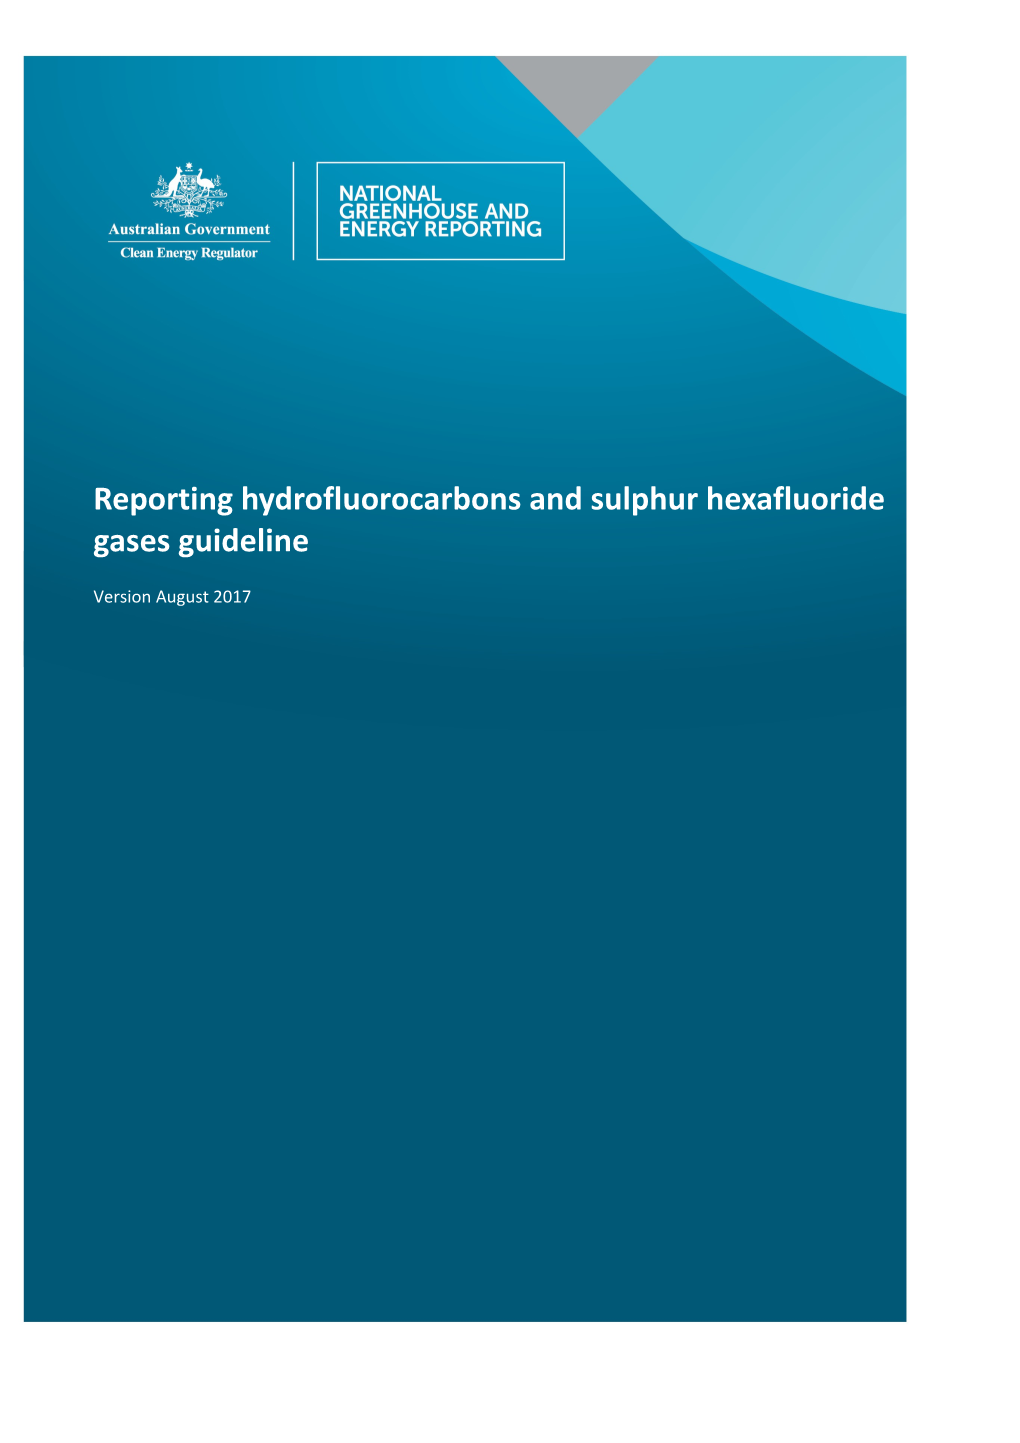 Reporting Hydrofluorocarbons and Sulphur Hexafluoride Gases Guideline